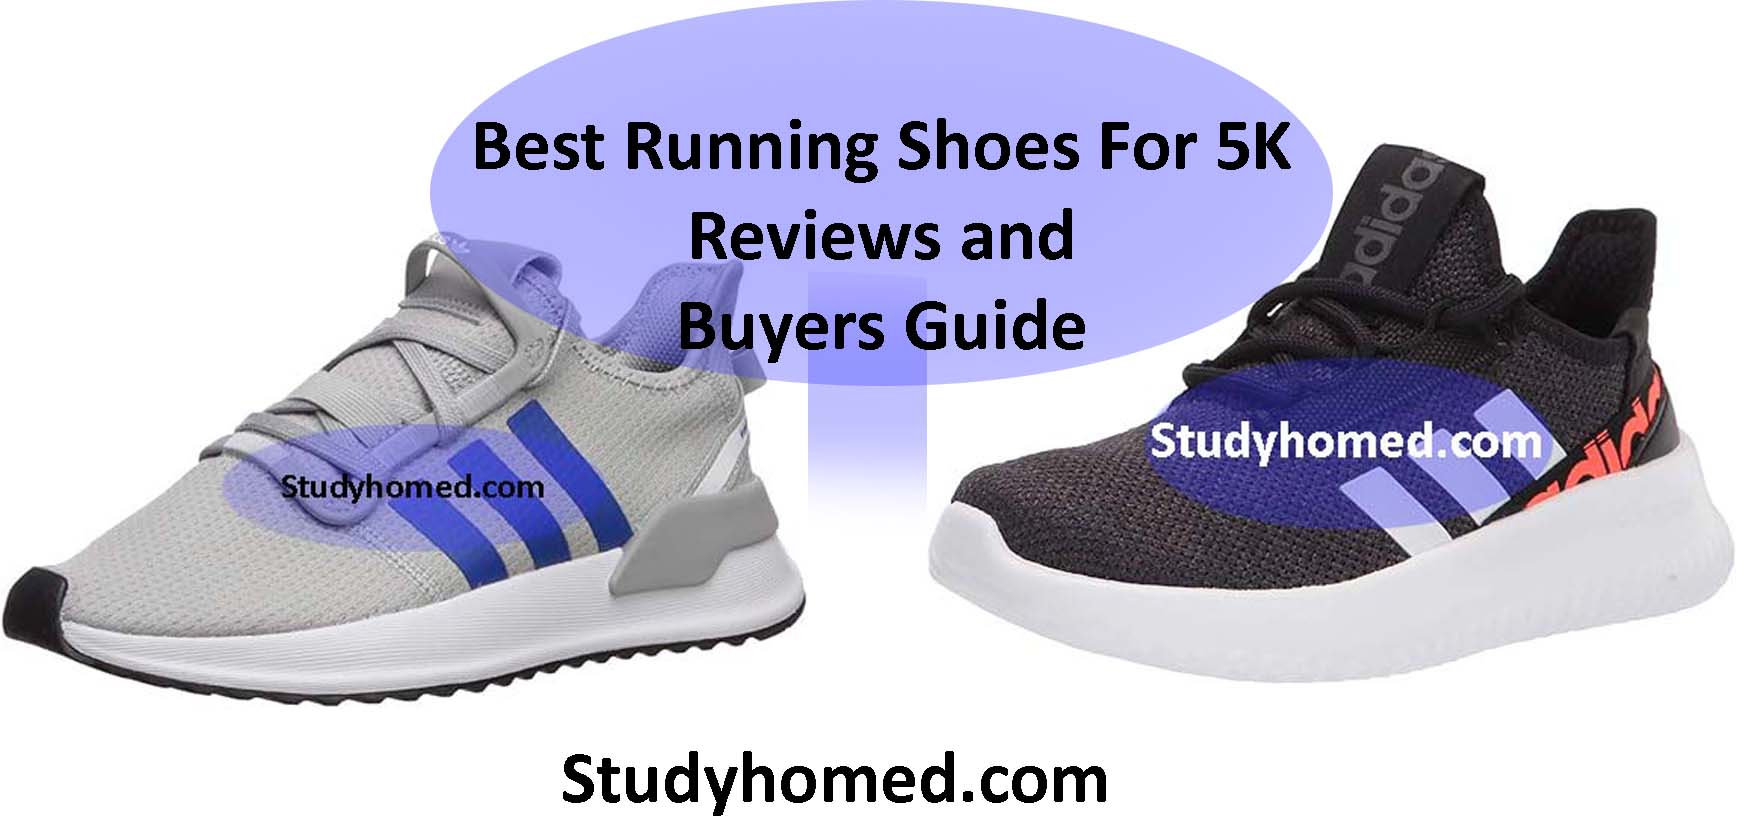 Best Running Shoes For 5K Reviews and Buyers Guide